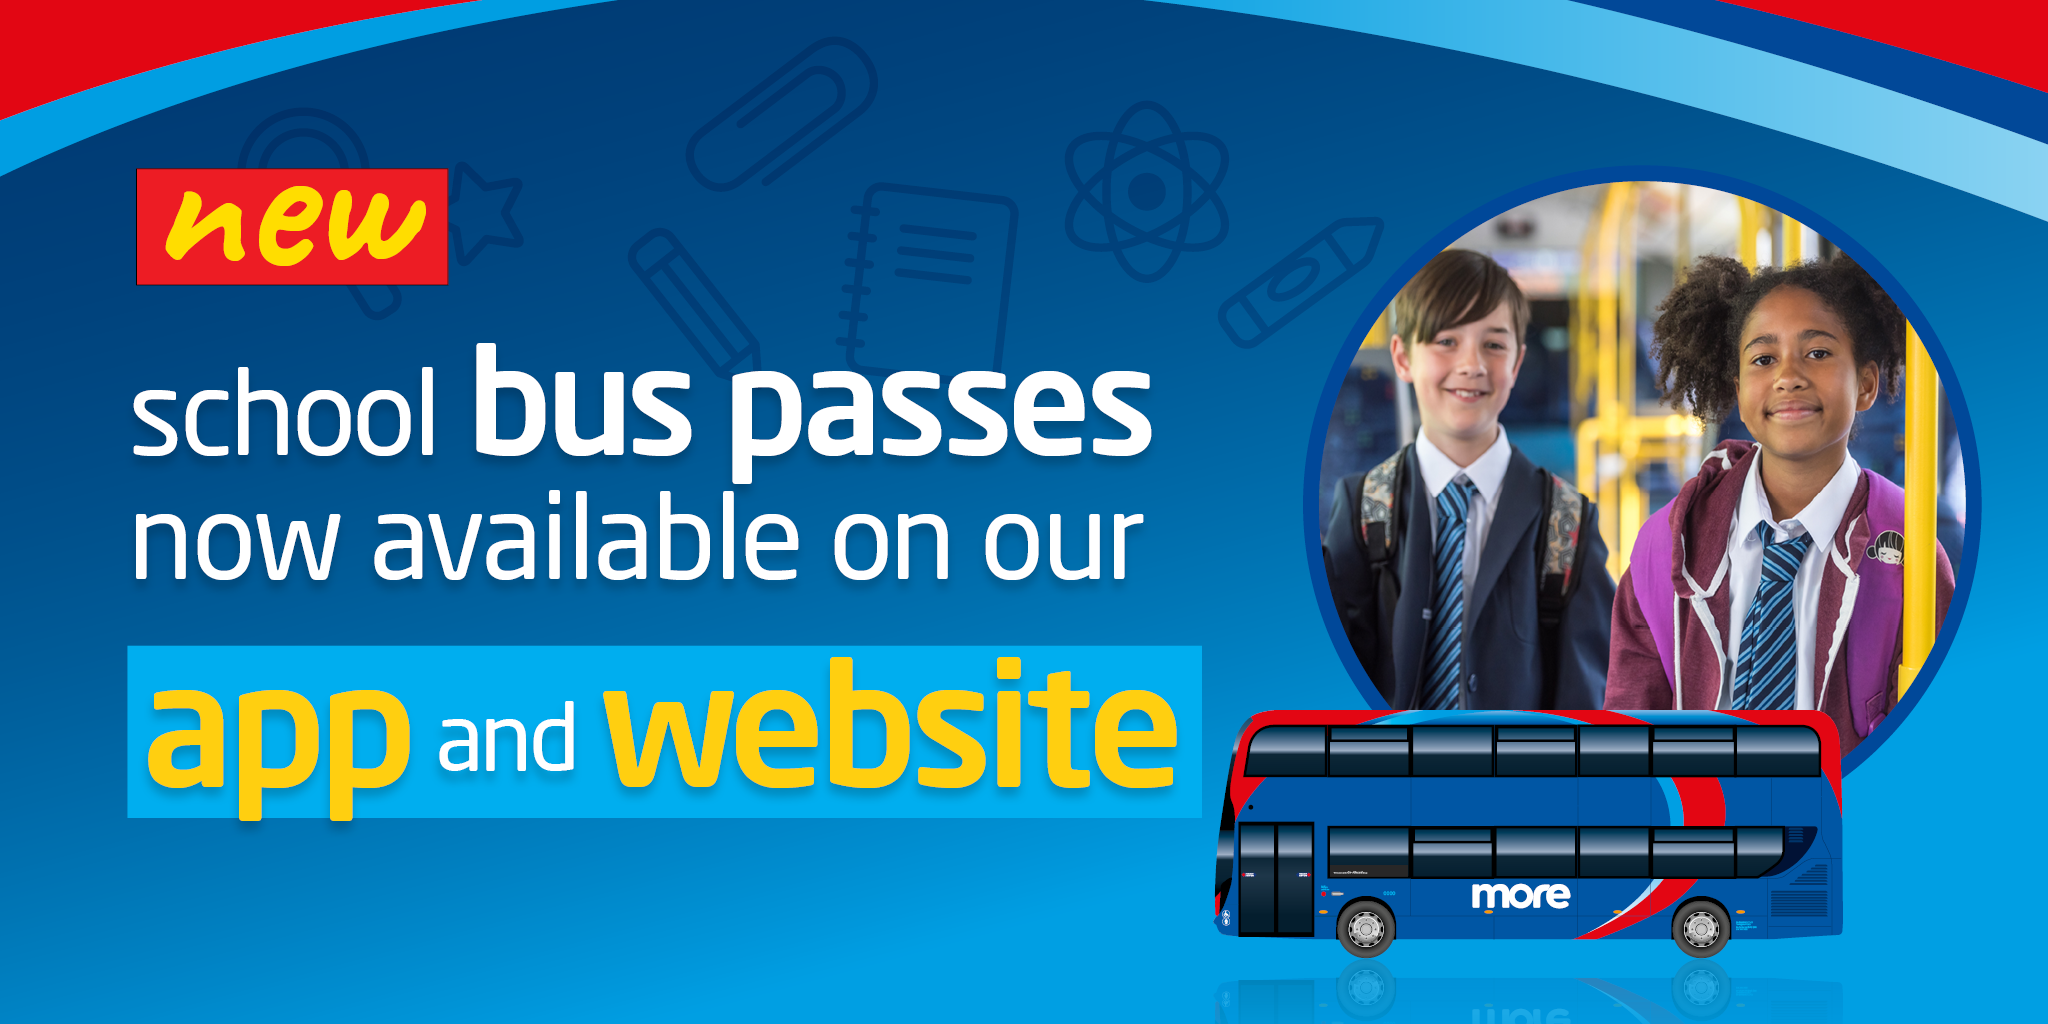 Advert which says 'school bus passes now available on our website and app'